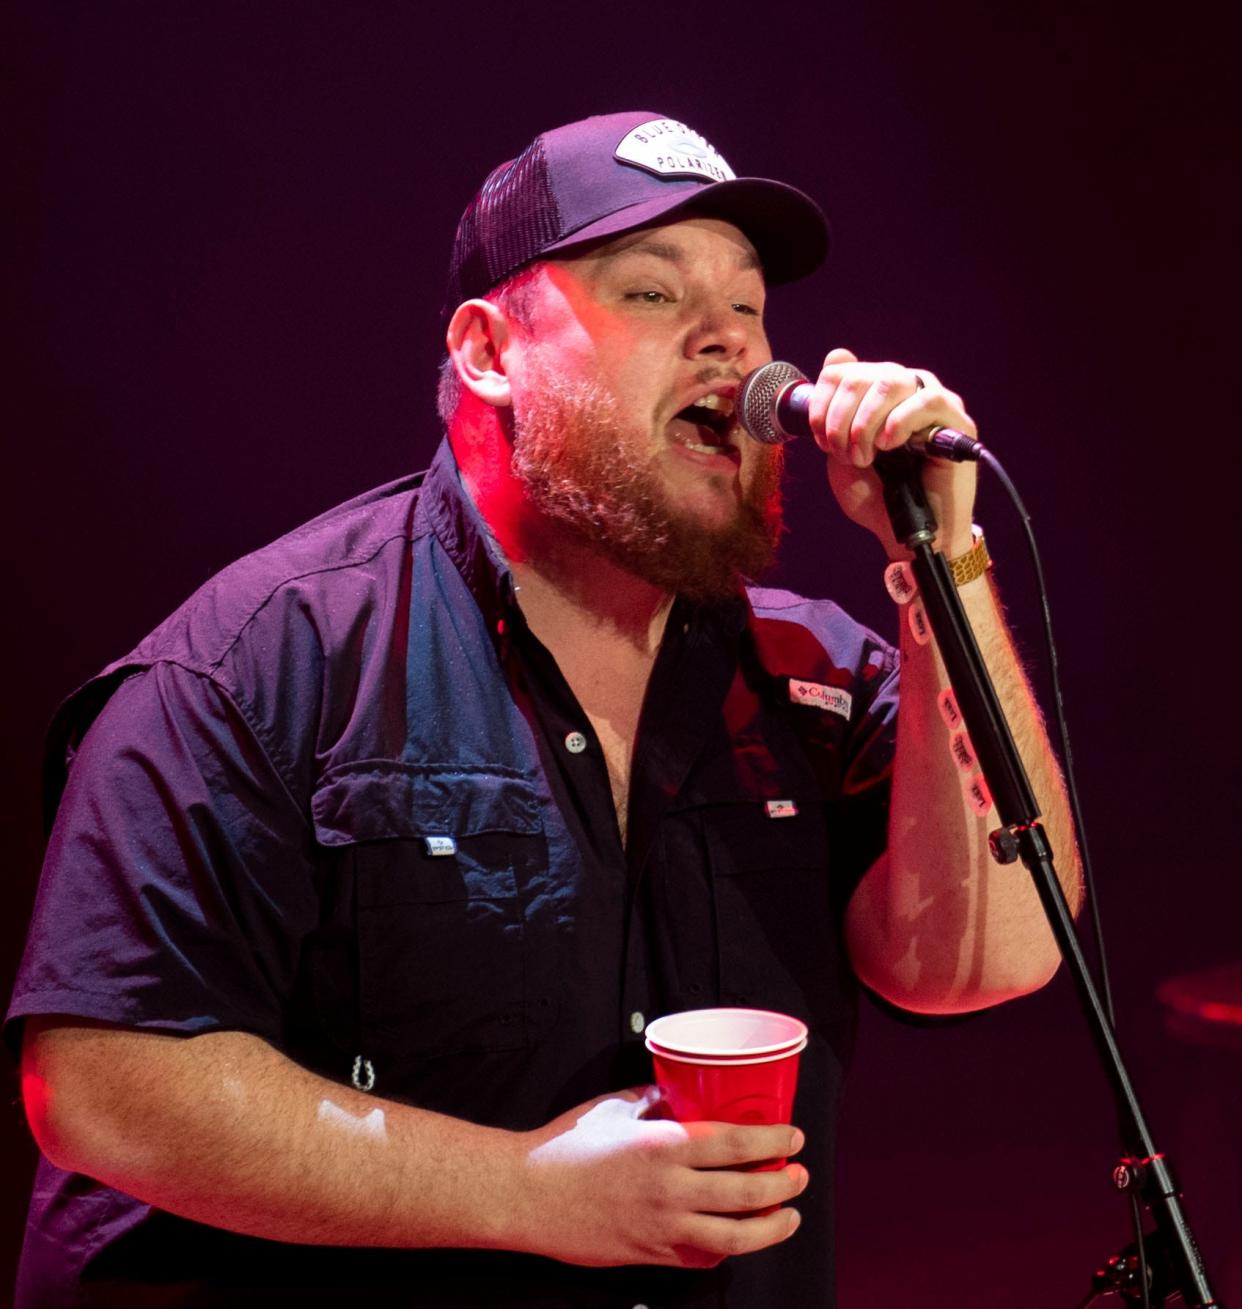 Luke Combs performs on Feb. 6 during the "Living Lucky With Luke Combs" performance at the Ryman Auditorium in Nashville, Tennessee. The performance was part of a multi-state lottery experience which was created via collaboration between ECE, Atlas Experiences, and Luke Combs.